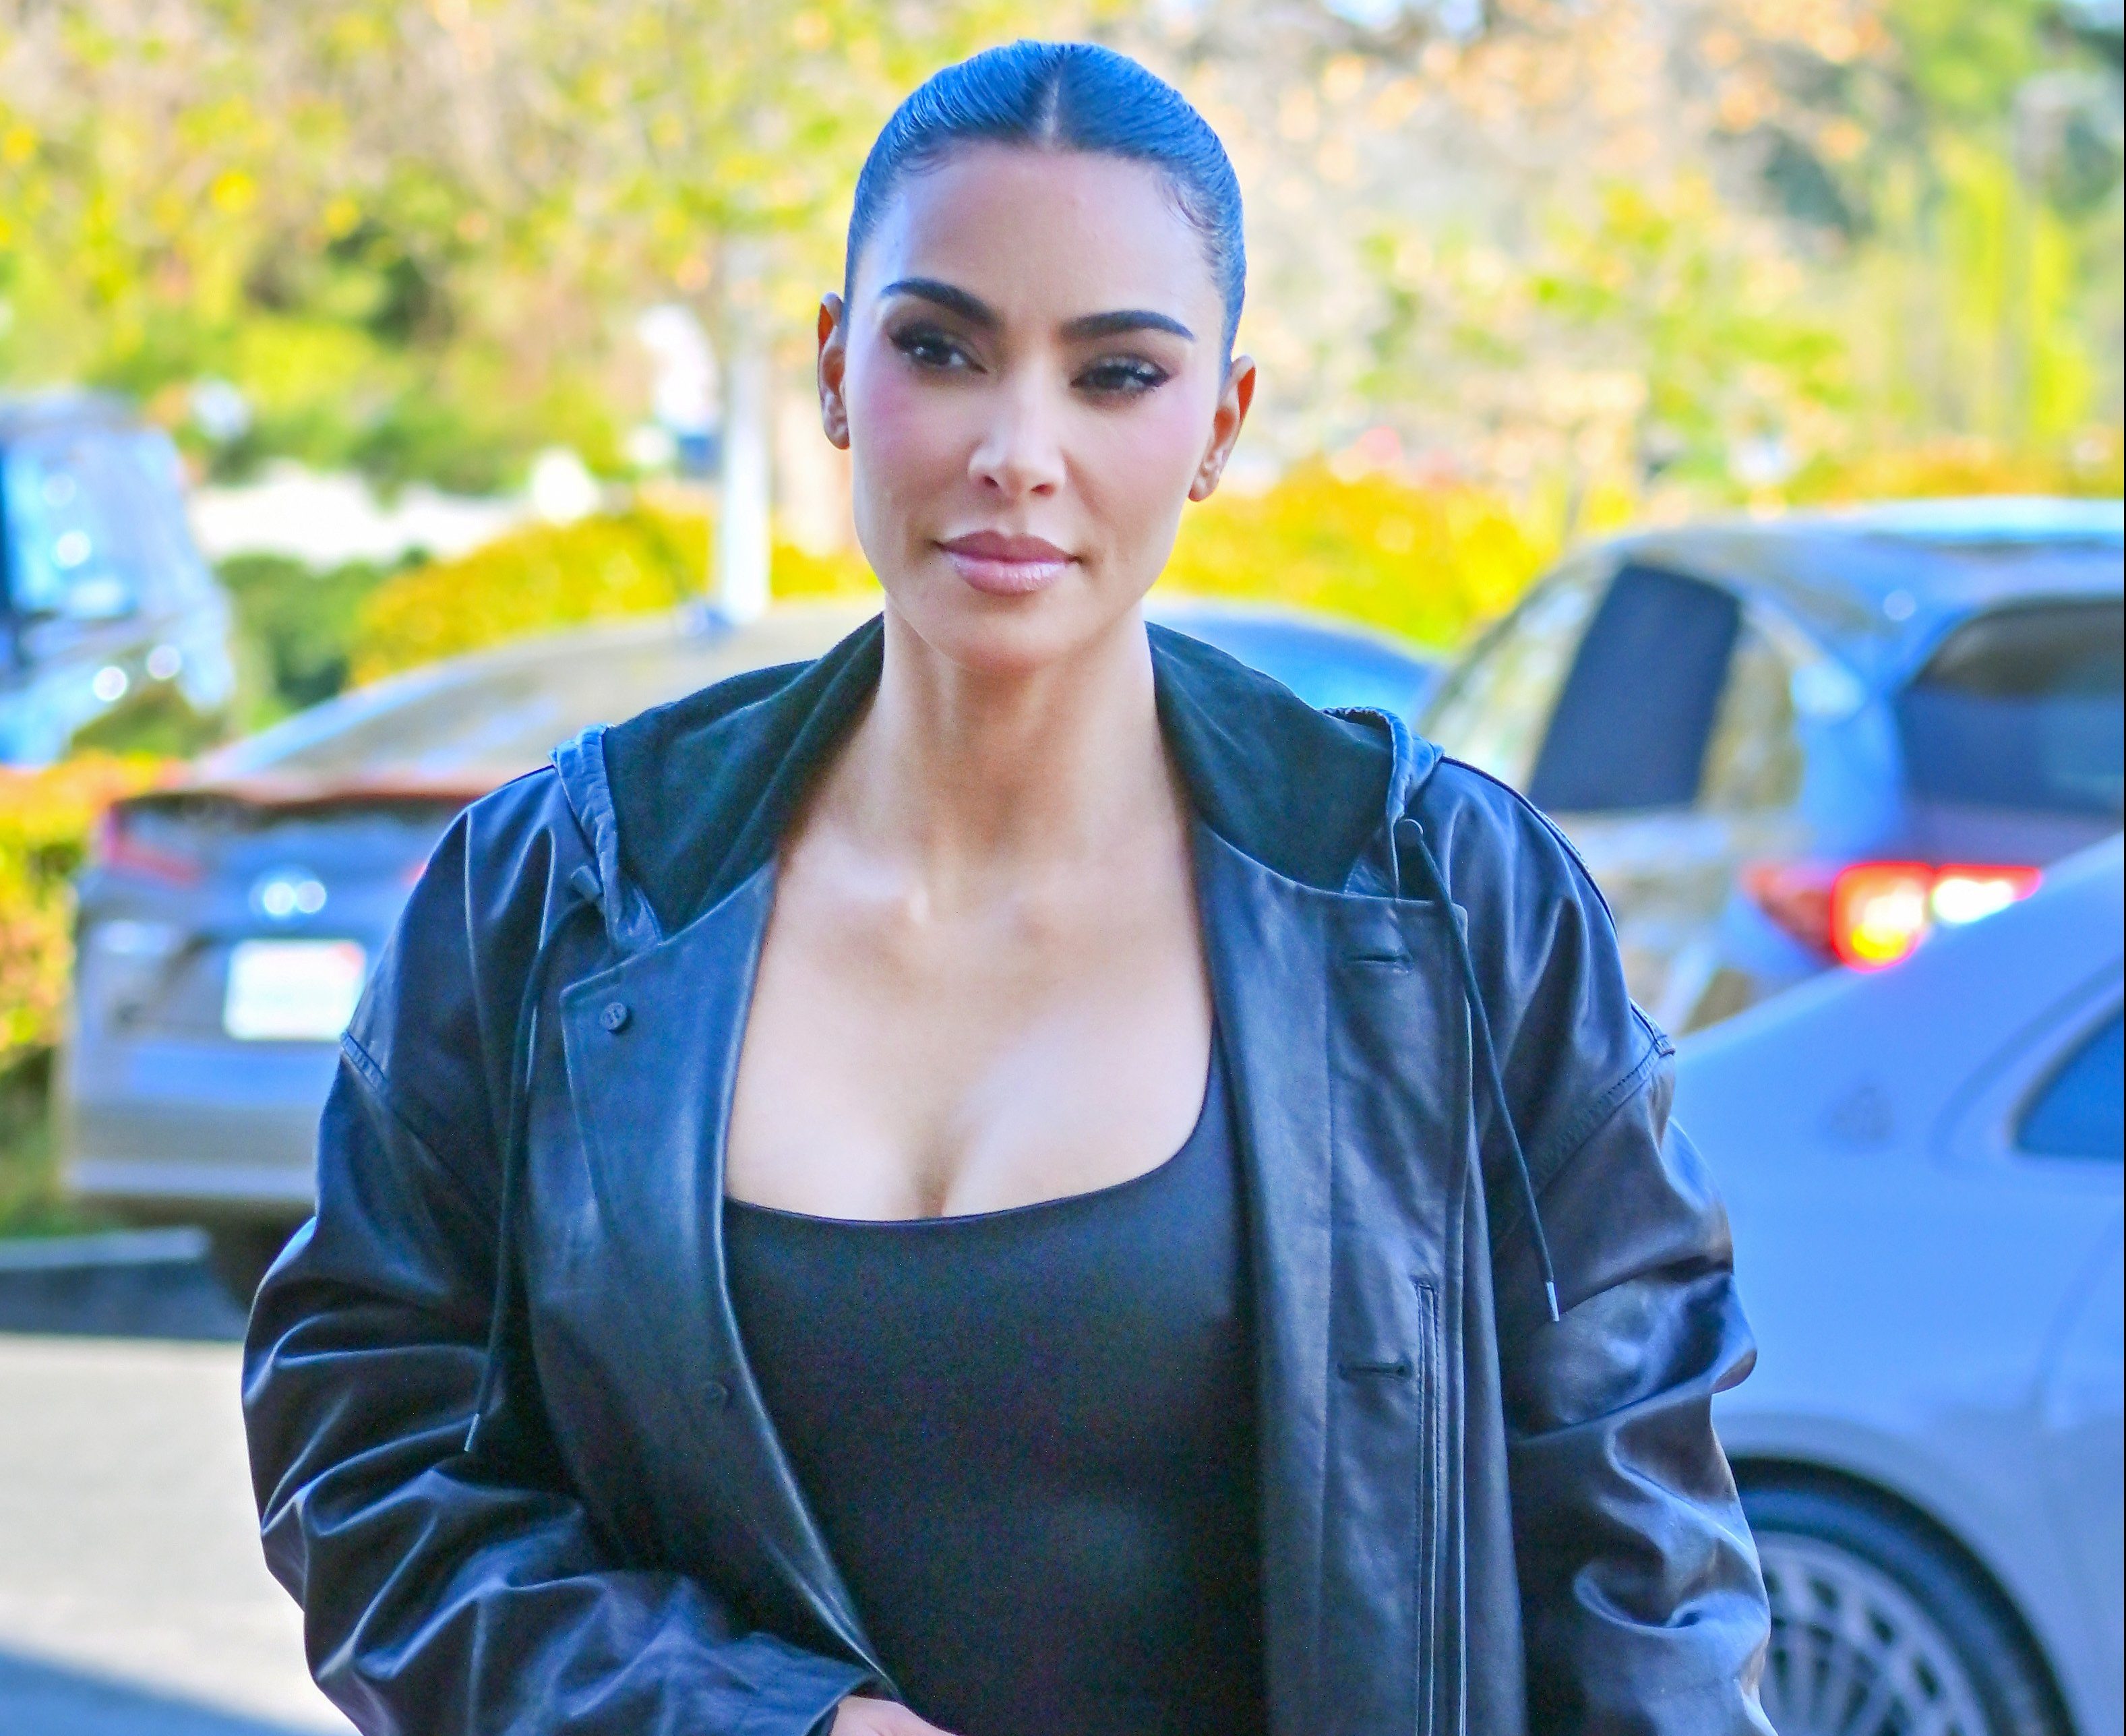 Kim buckles up in Italy, more of the best photos from her trip to